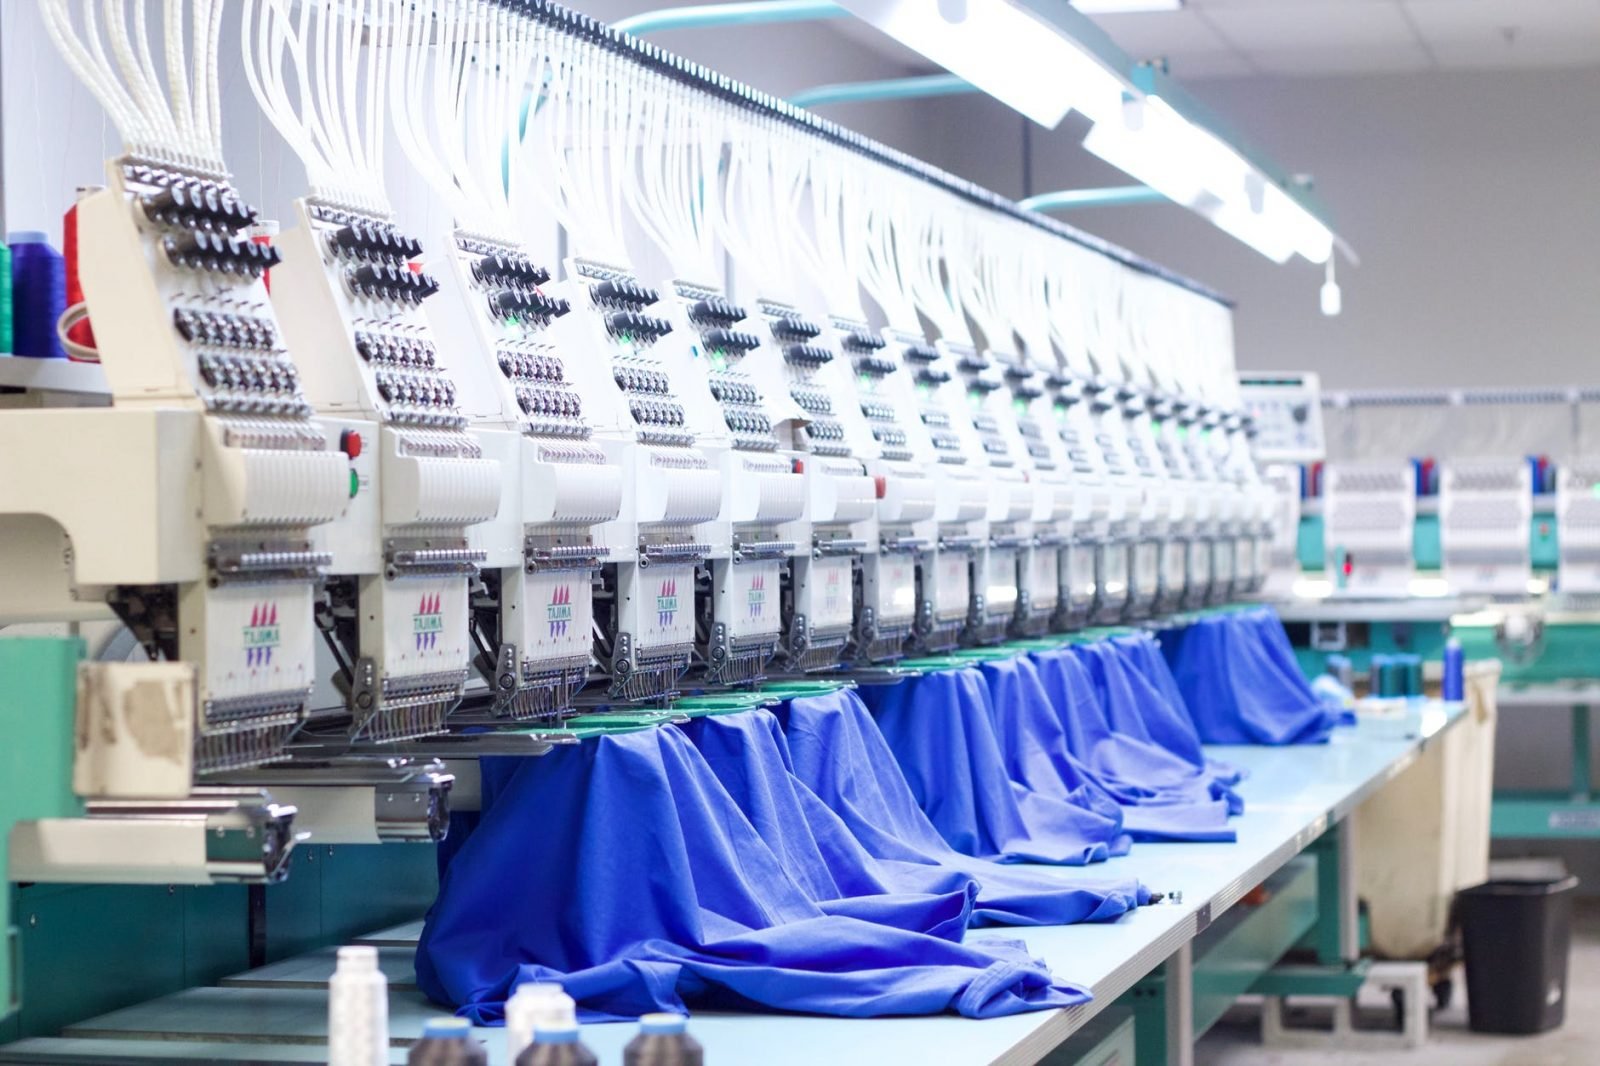 cloth manufacturing business plan india